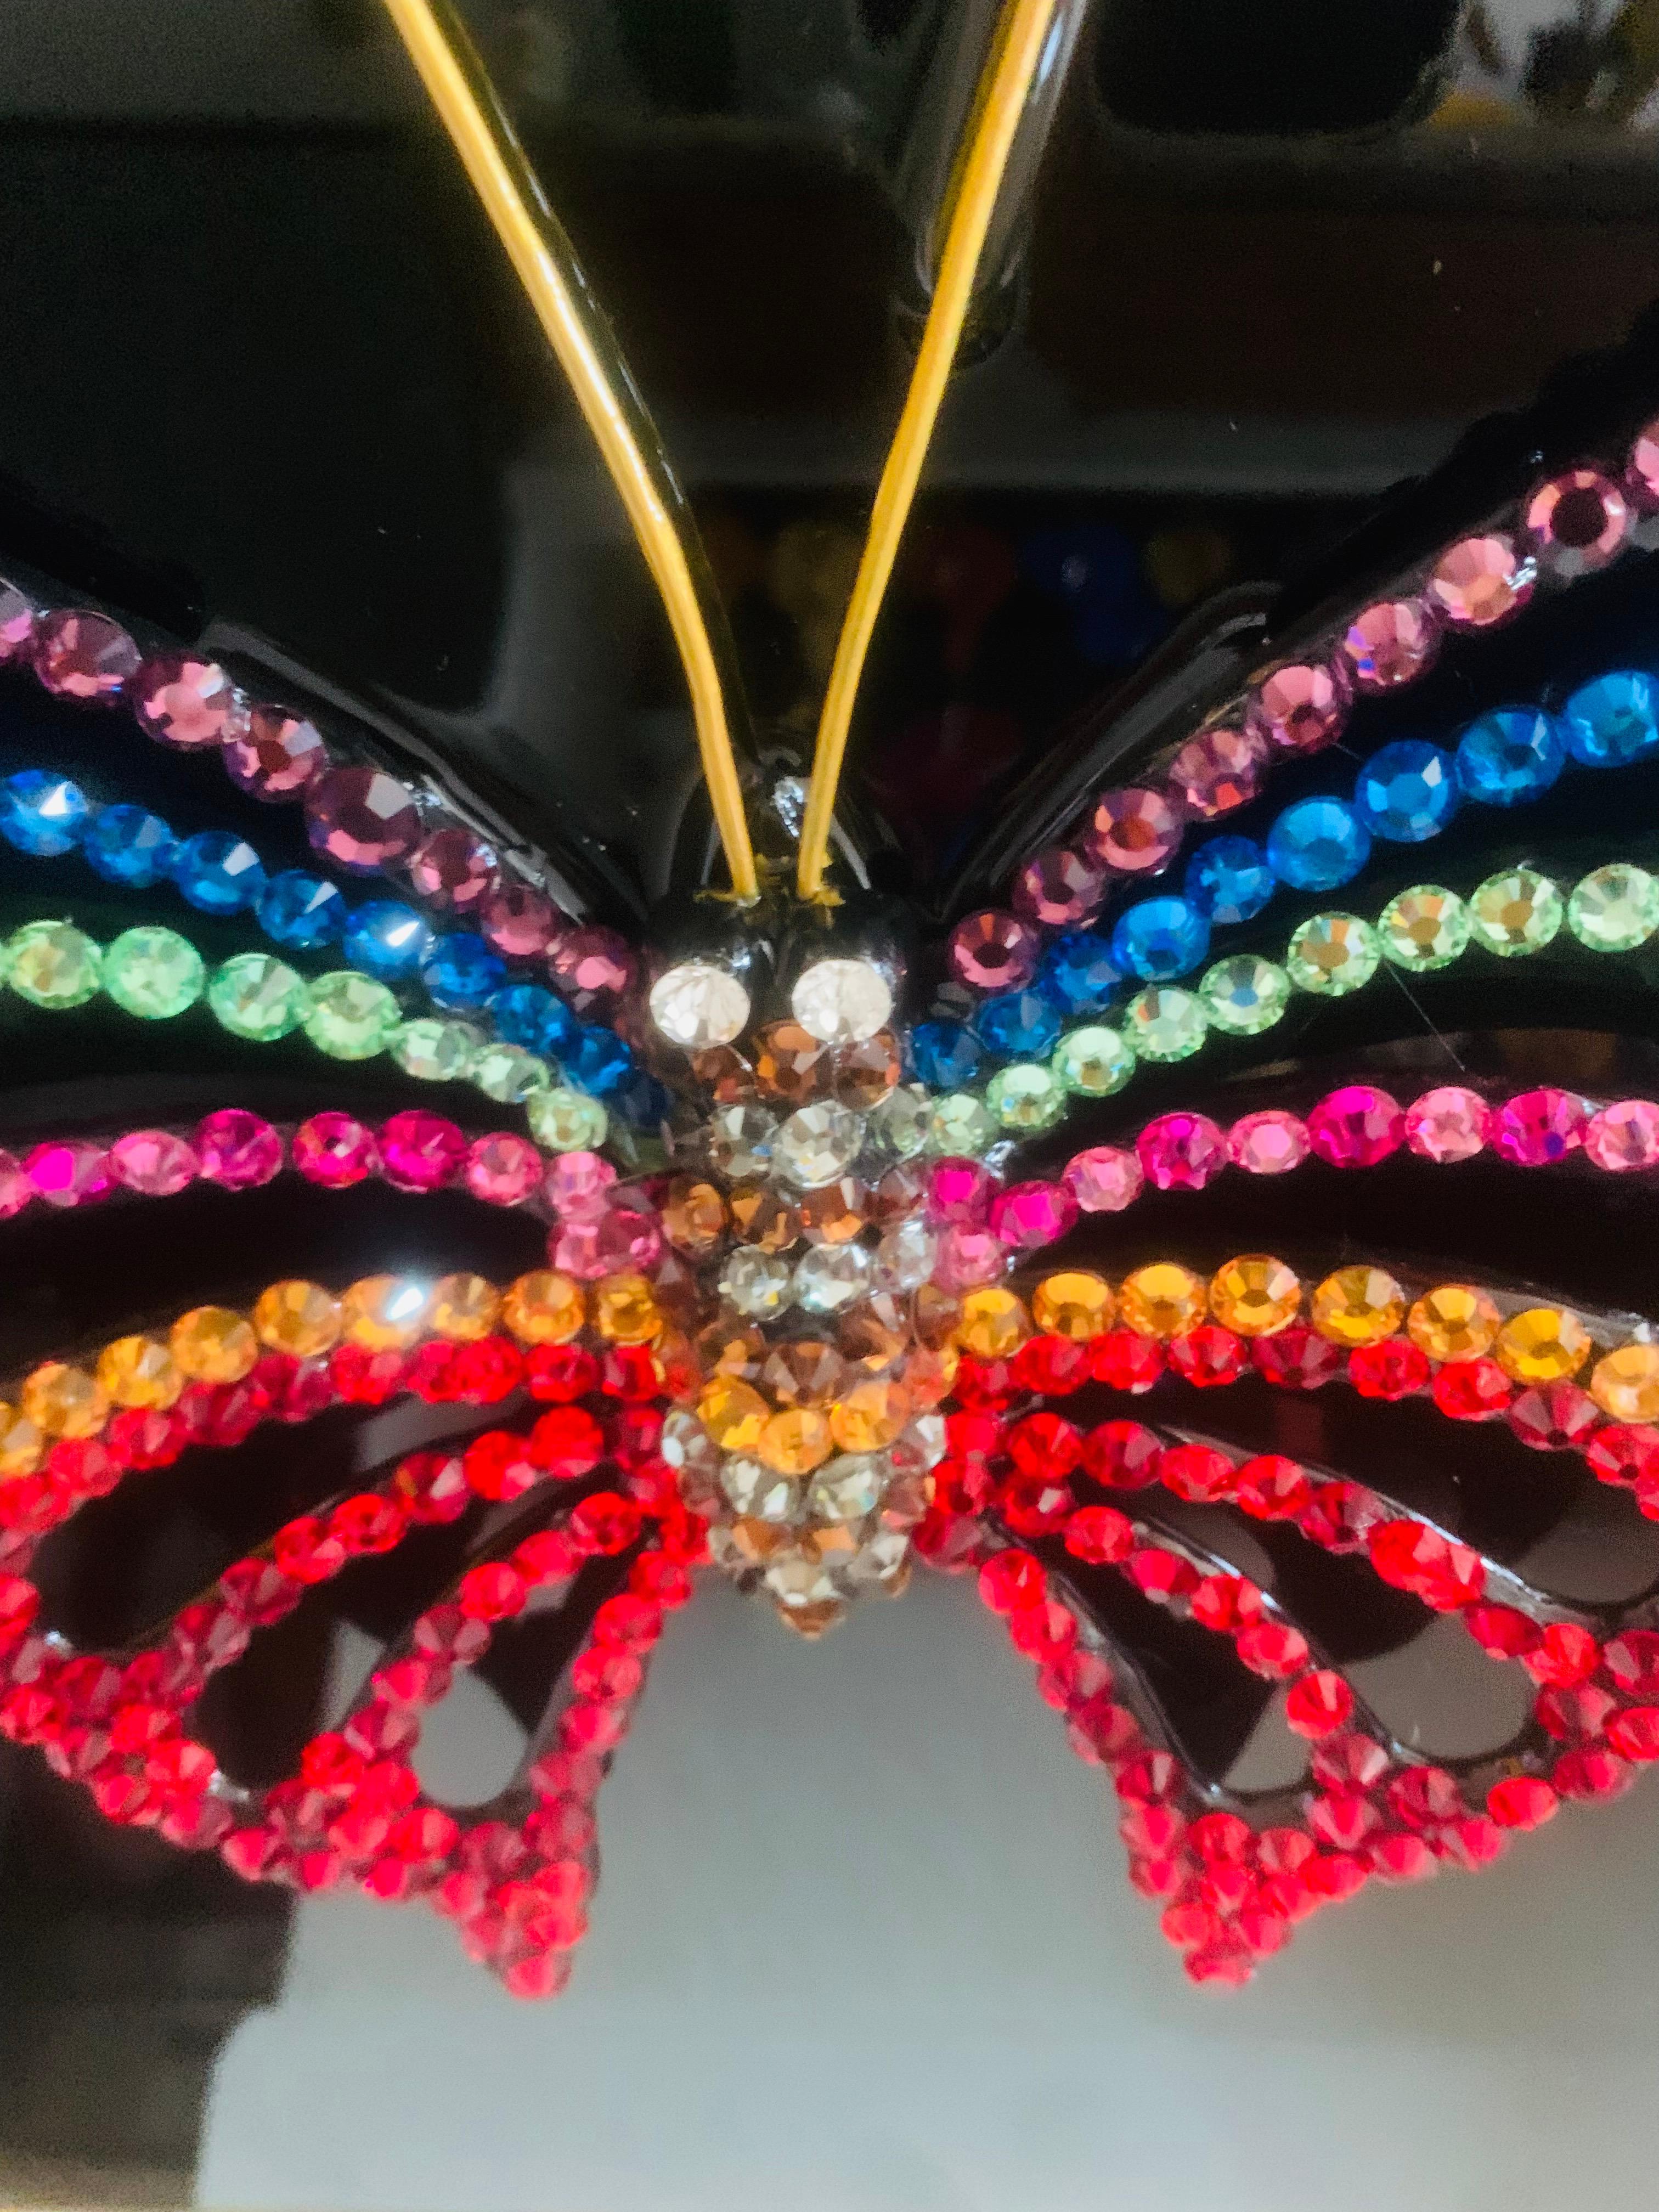 PRIDE BUTTERFLY (One of a Kind Swarovski Mixed Media Sculpture) 9